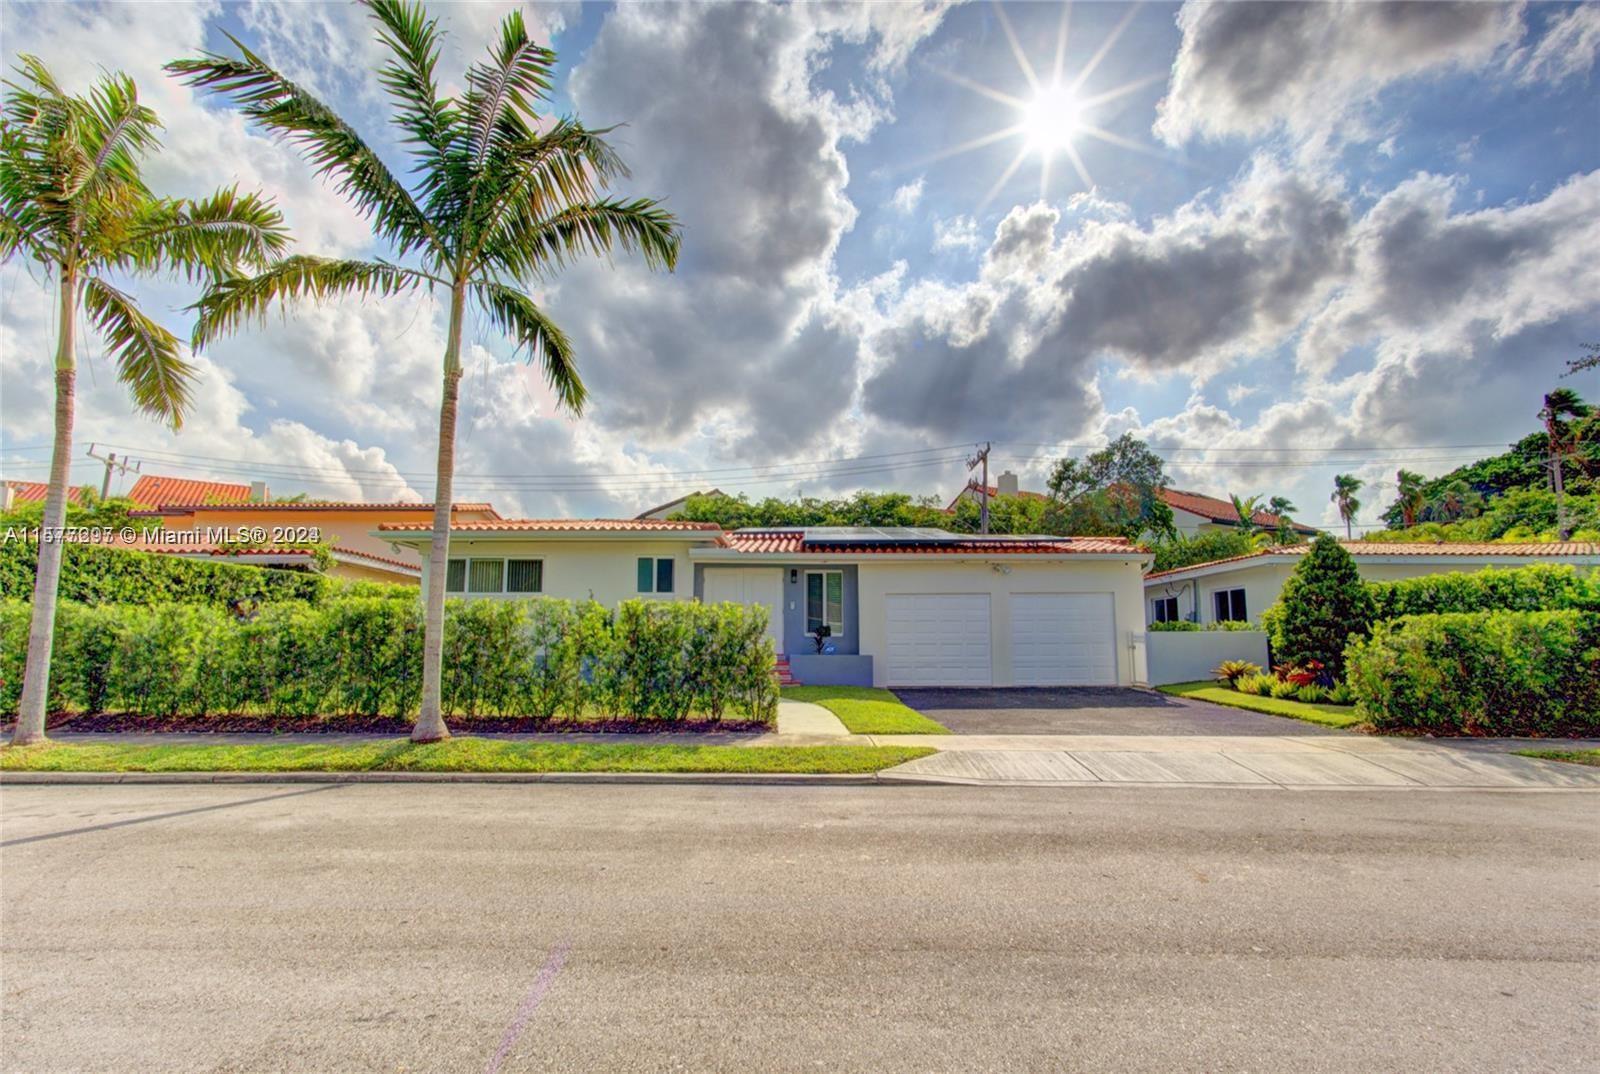 Photo of 3508 Crystal View Ct in Miami, FL